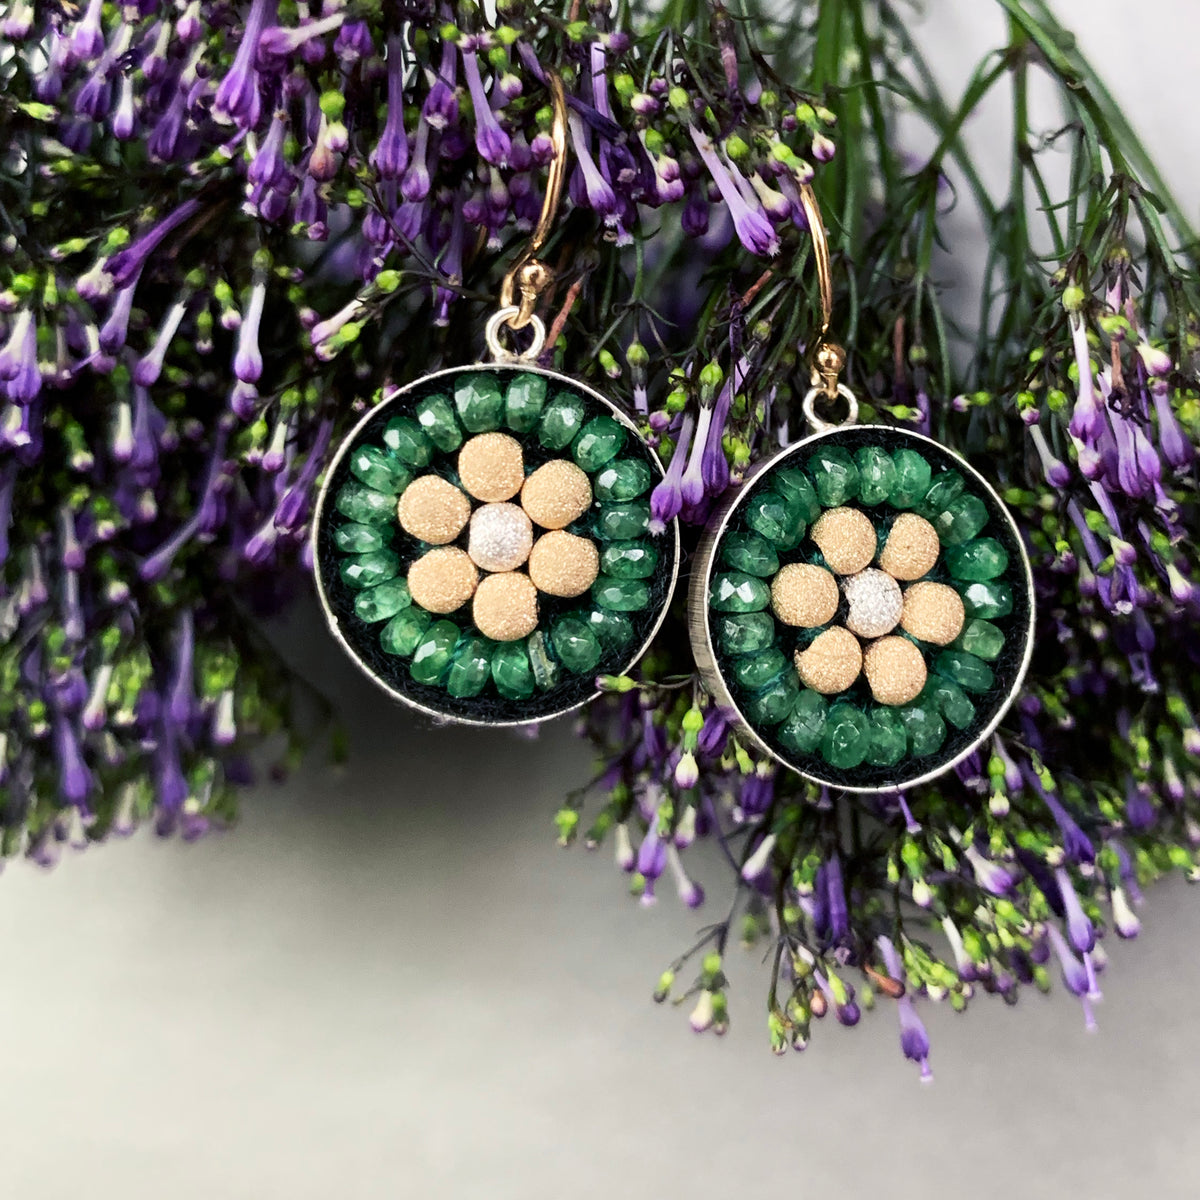 Emerald, Gold, and Silver Mosaic earrings